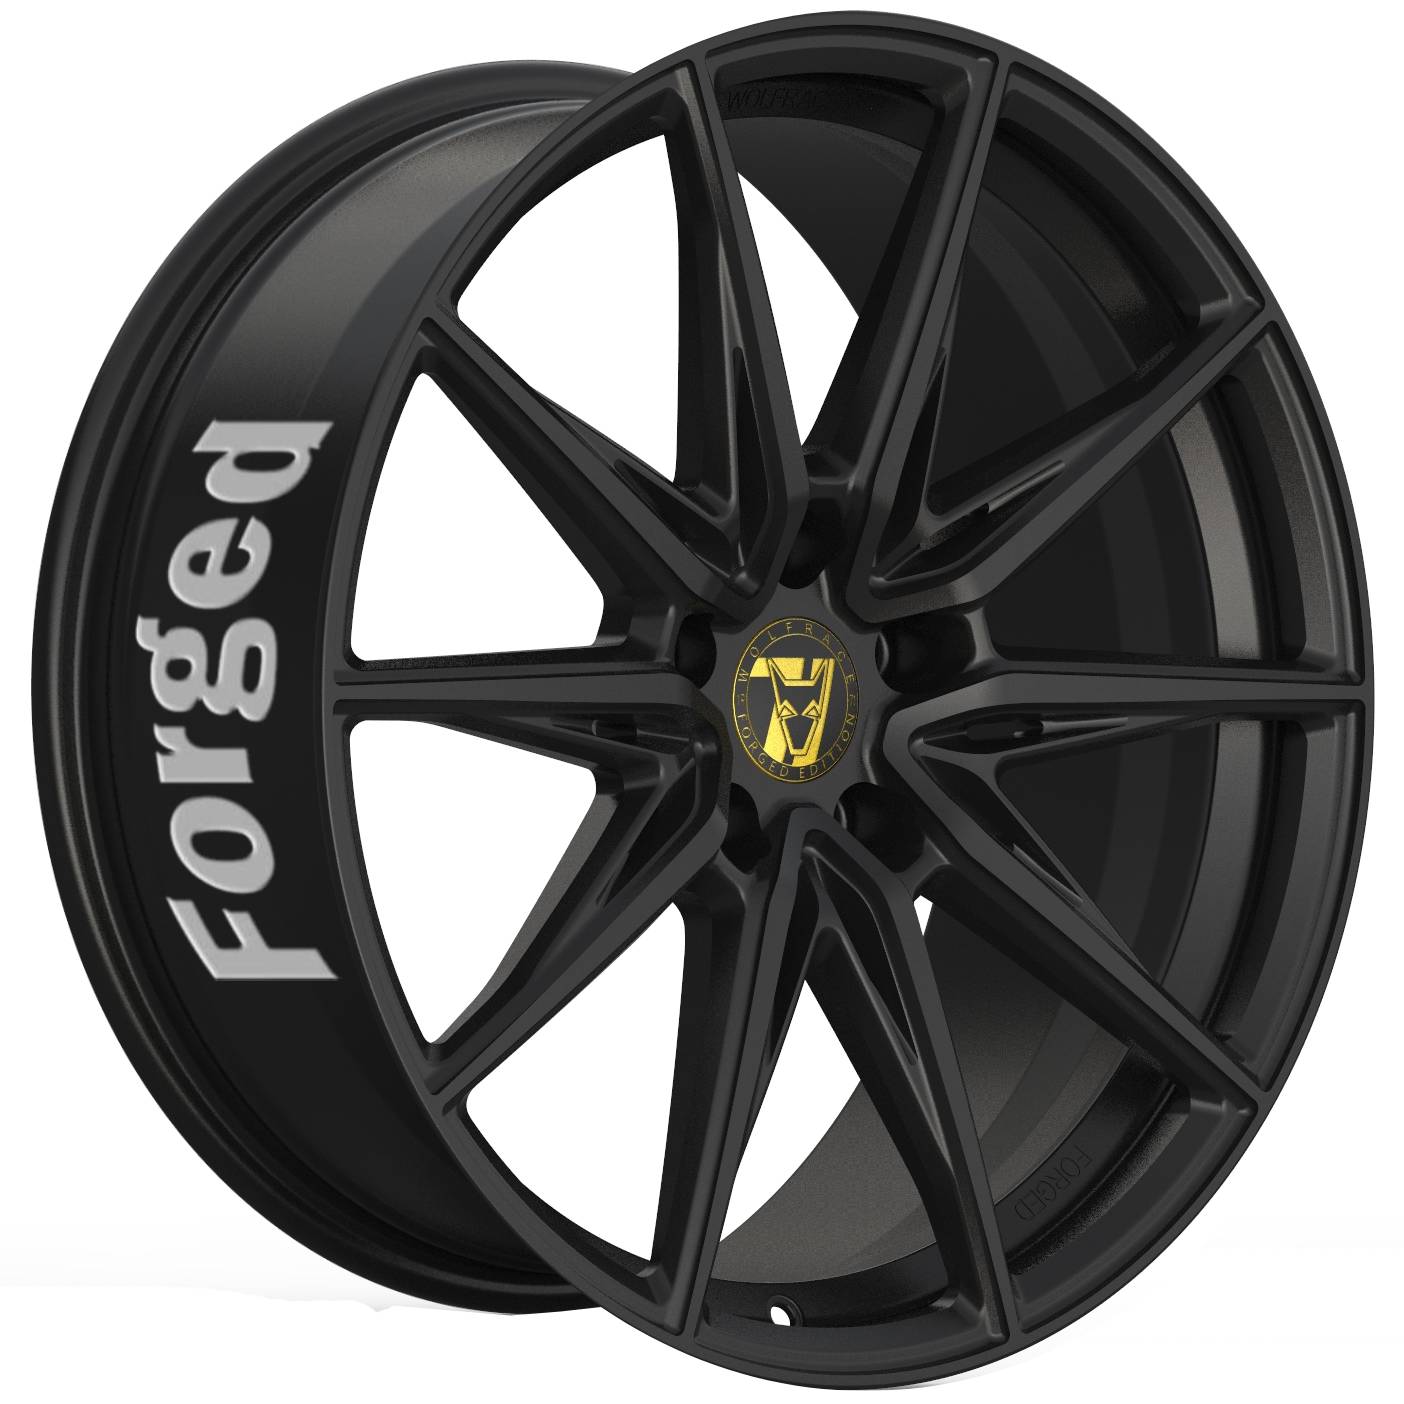 Jantes alu Demon Wheels 71 Forged Edition Urban Racer Forged [13x23] -5x120- ET 45